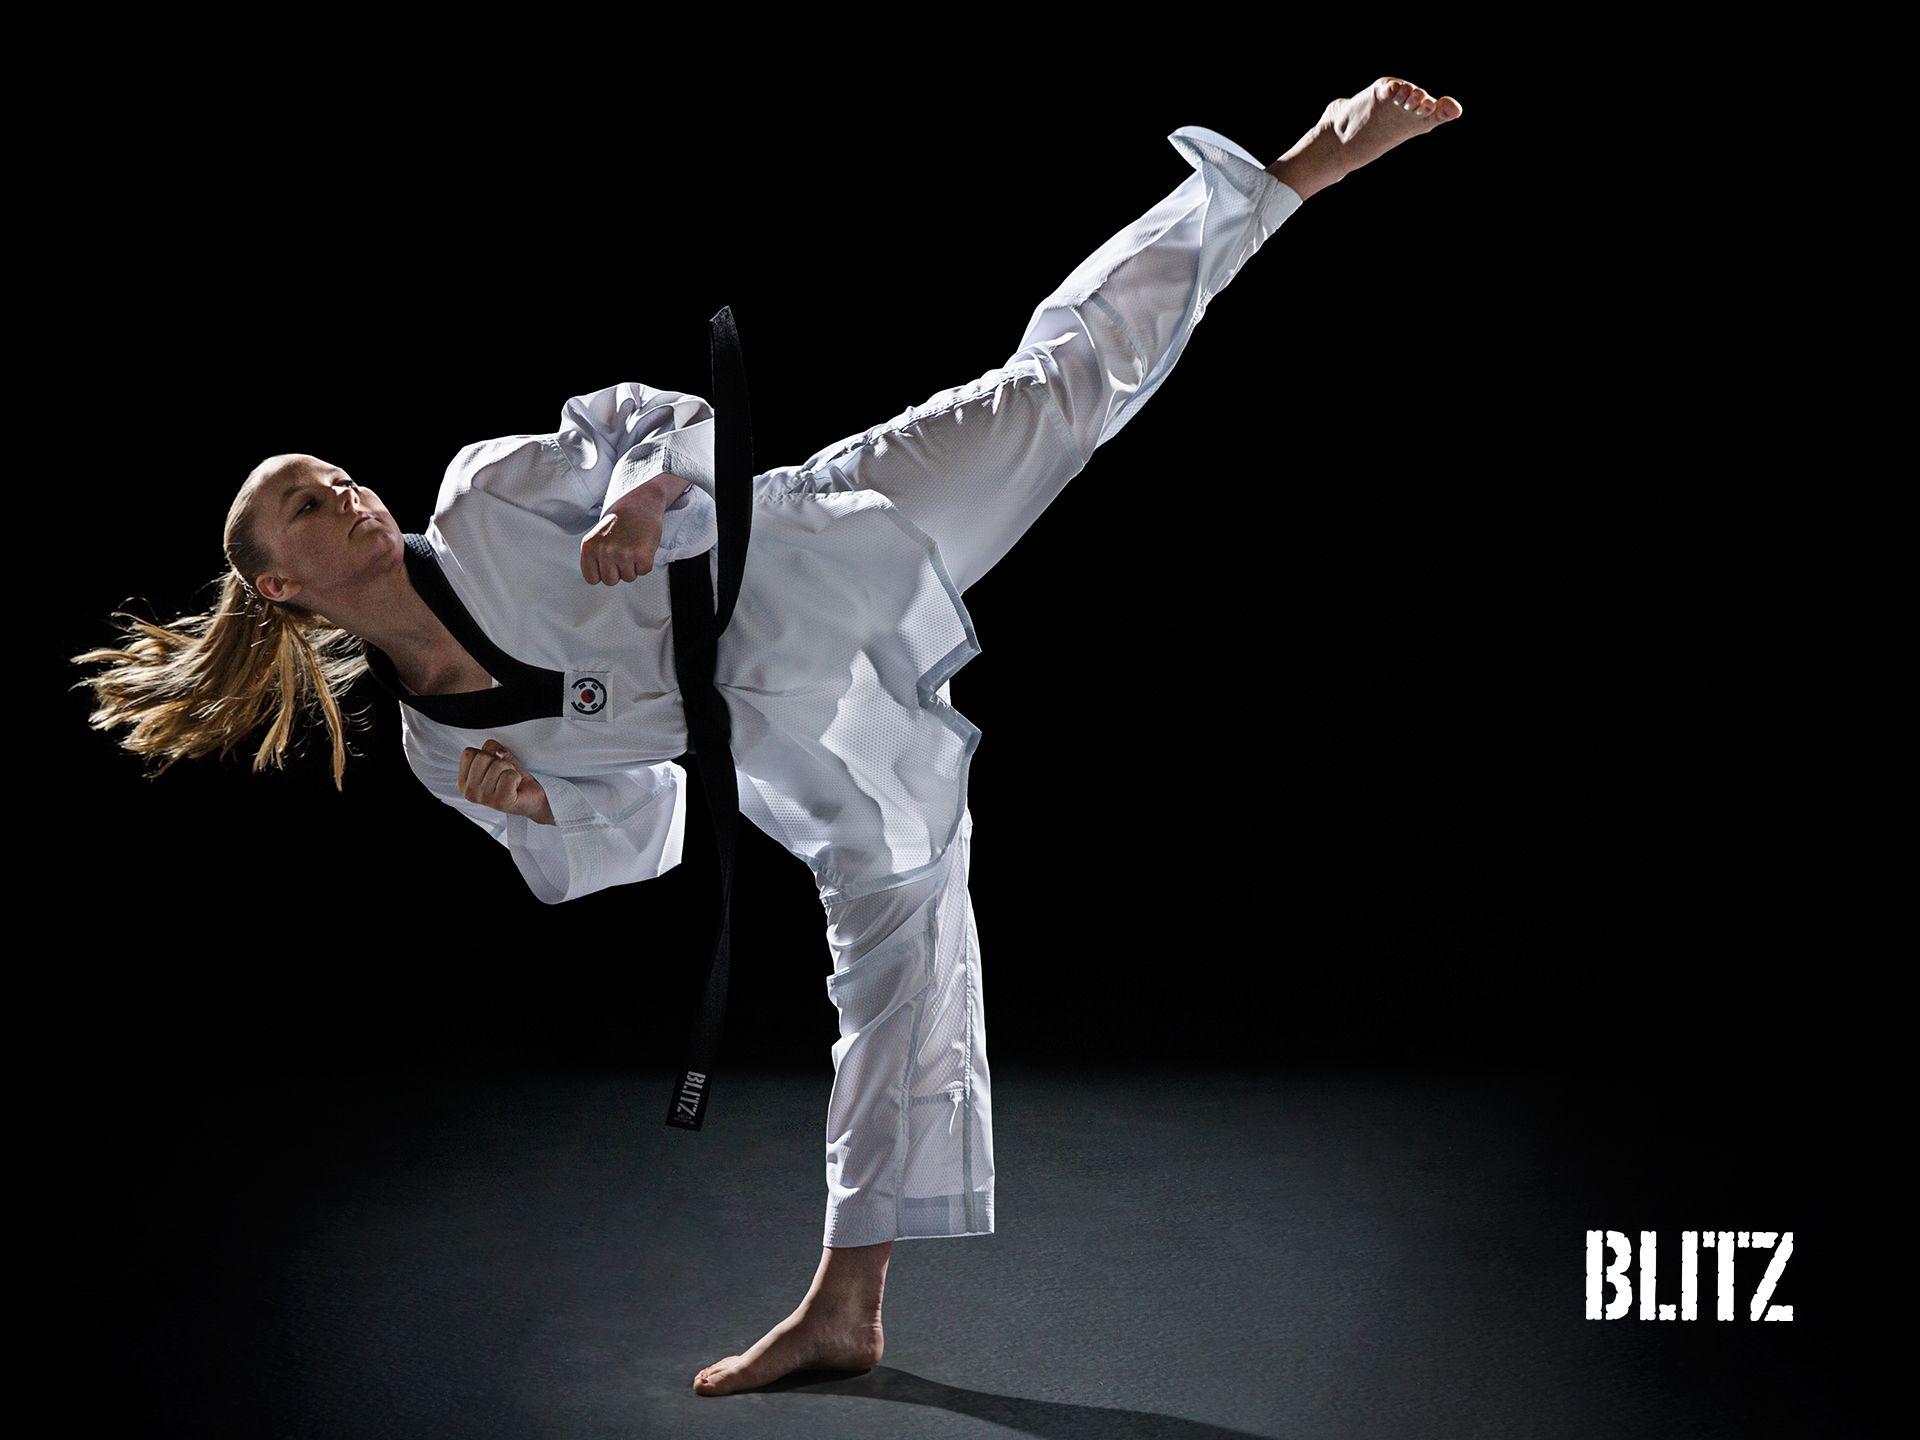 Download the latest Martial Arts wallpaper from Blitz